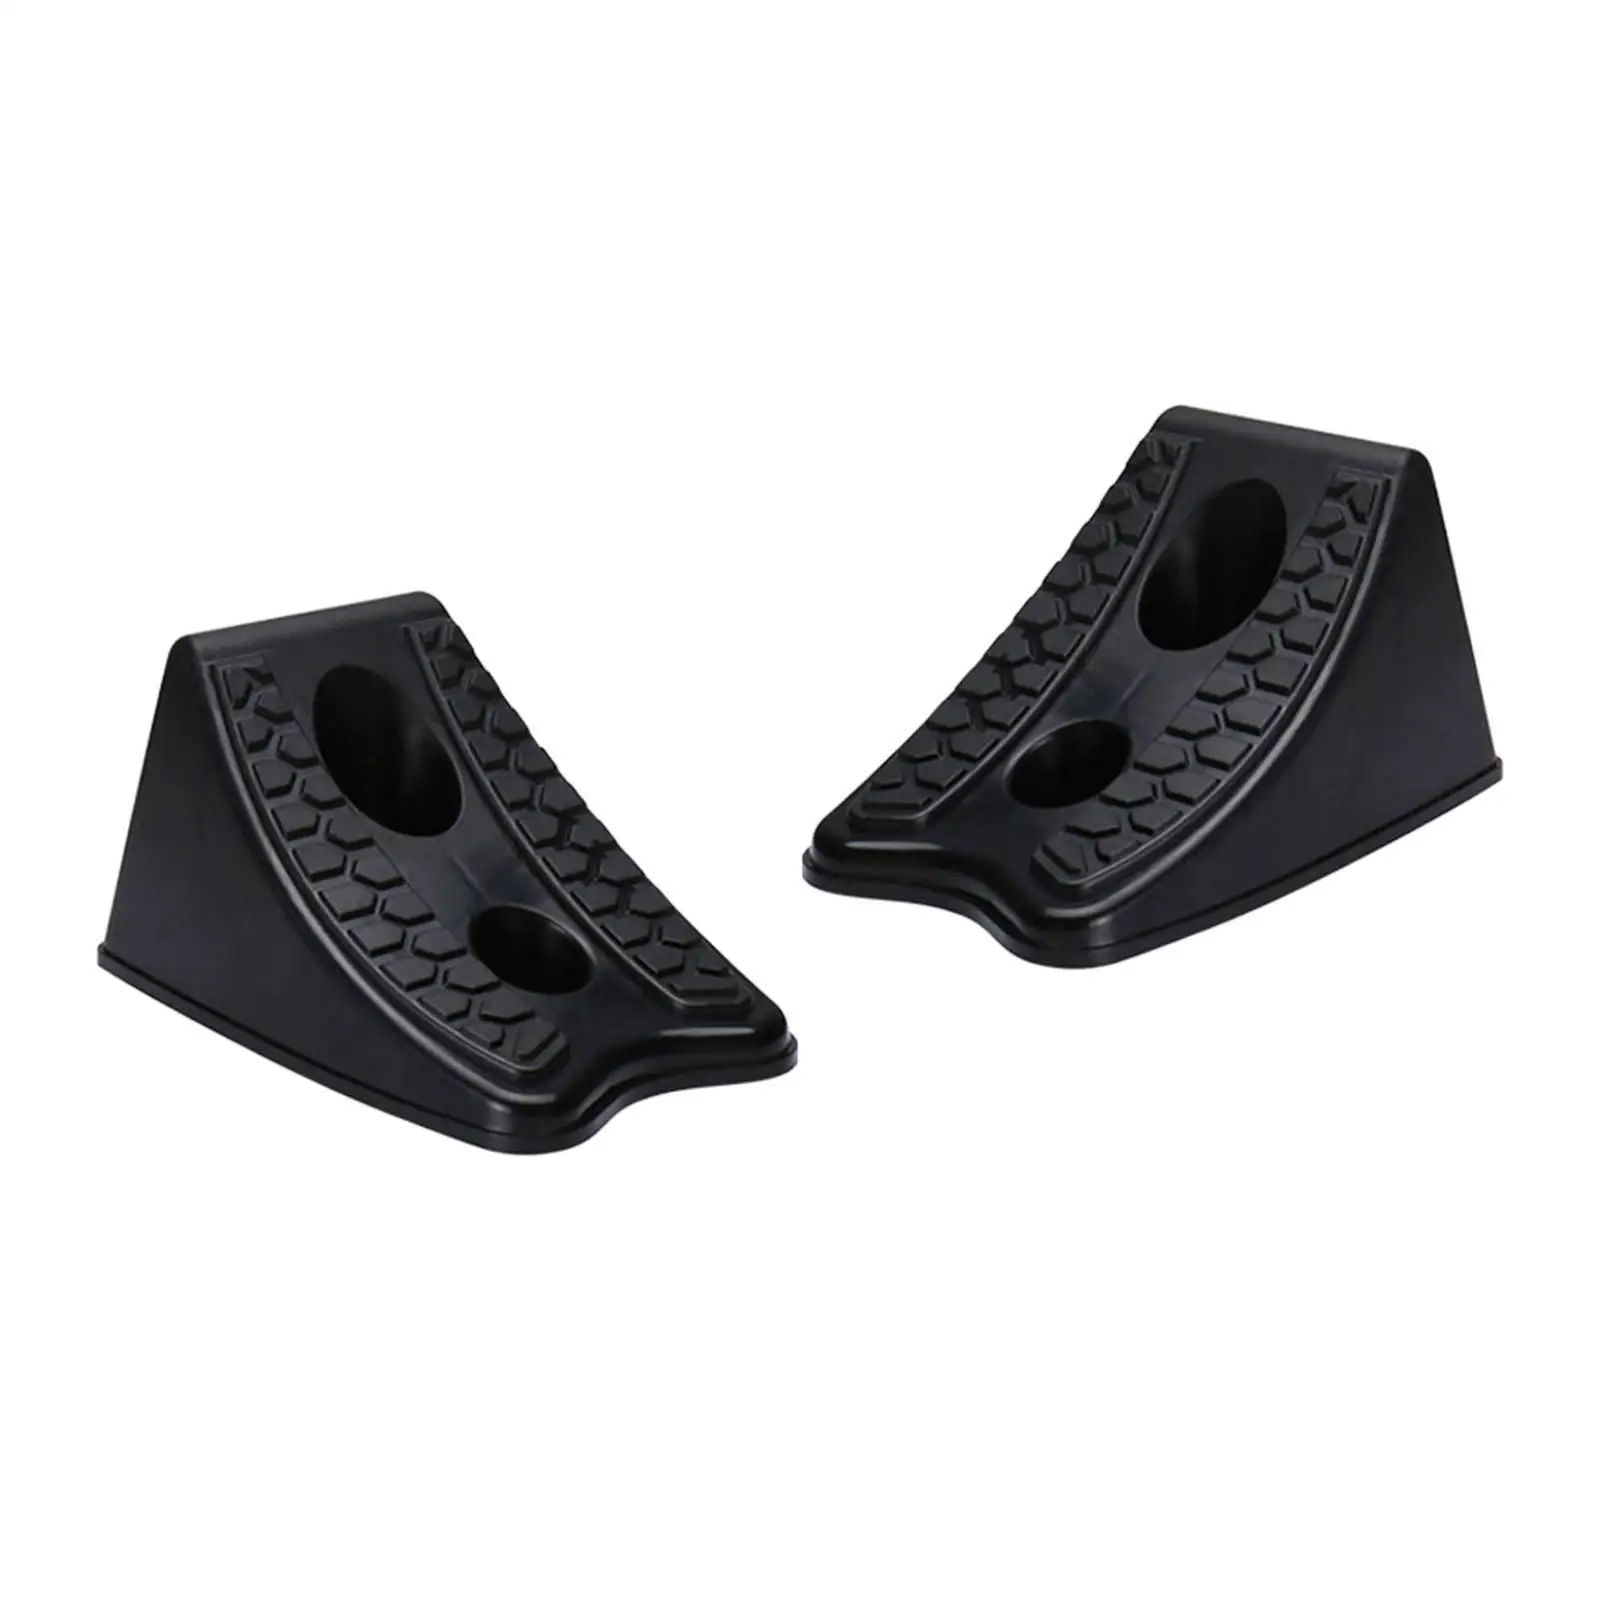 2 Pieces Wheel Chocks Stable High Performance Wheel Wedge Car Control Wheel Alignment Block Tire Support Pad for ATV Truck